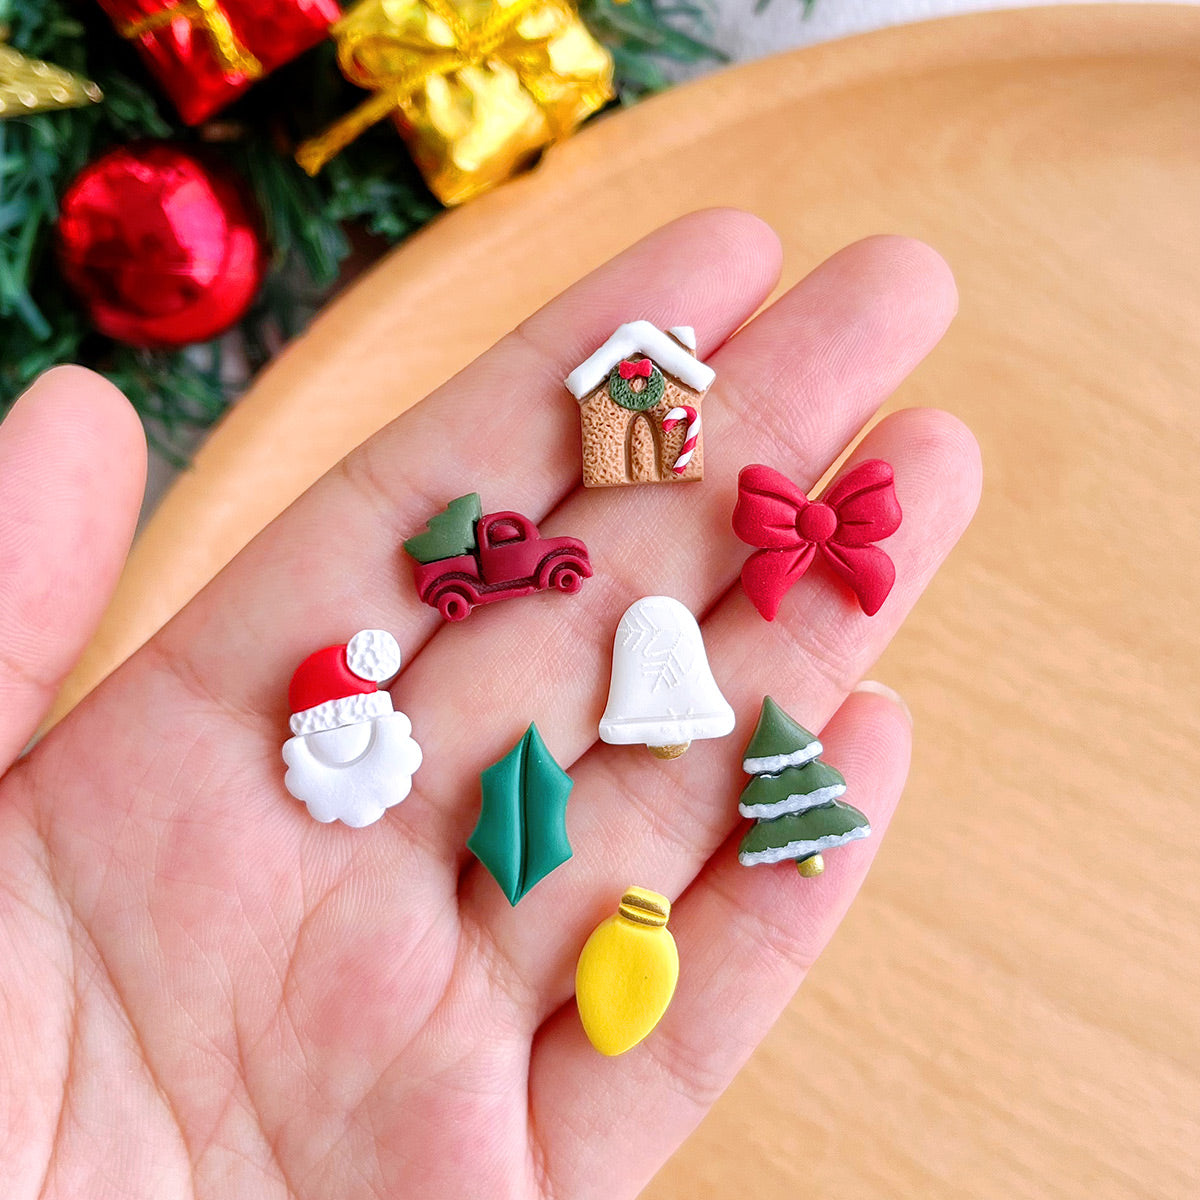 KEOKER Christmas Polymer Clay Cutters (21 Shapes）